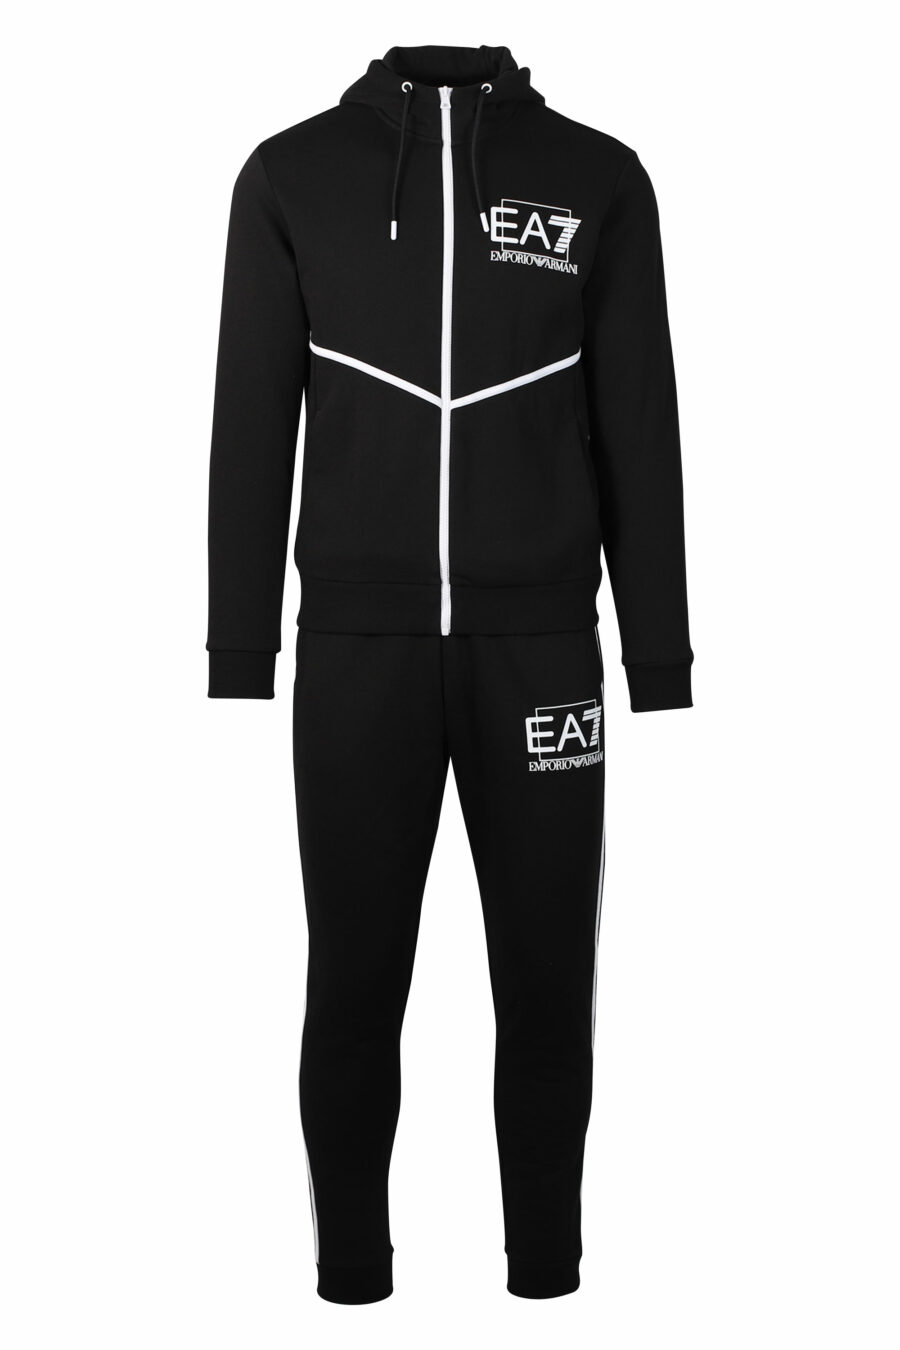 Black sports outfit with white maxilogue - 8053616260339 4